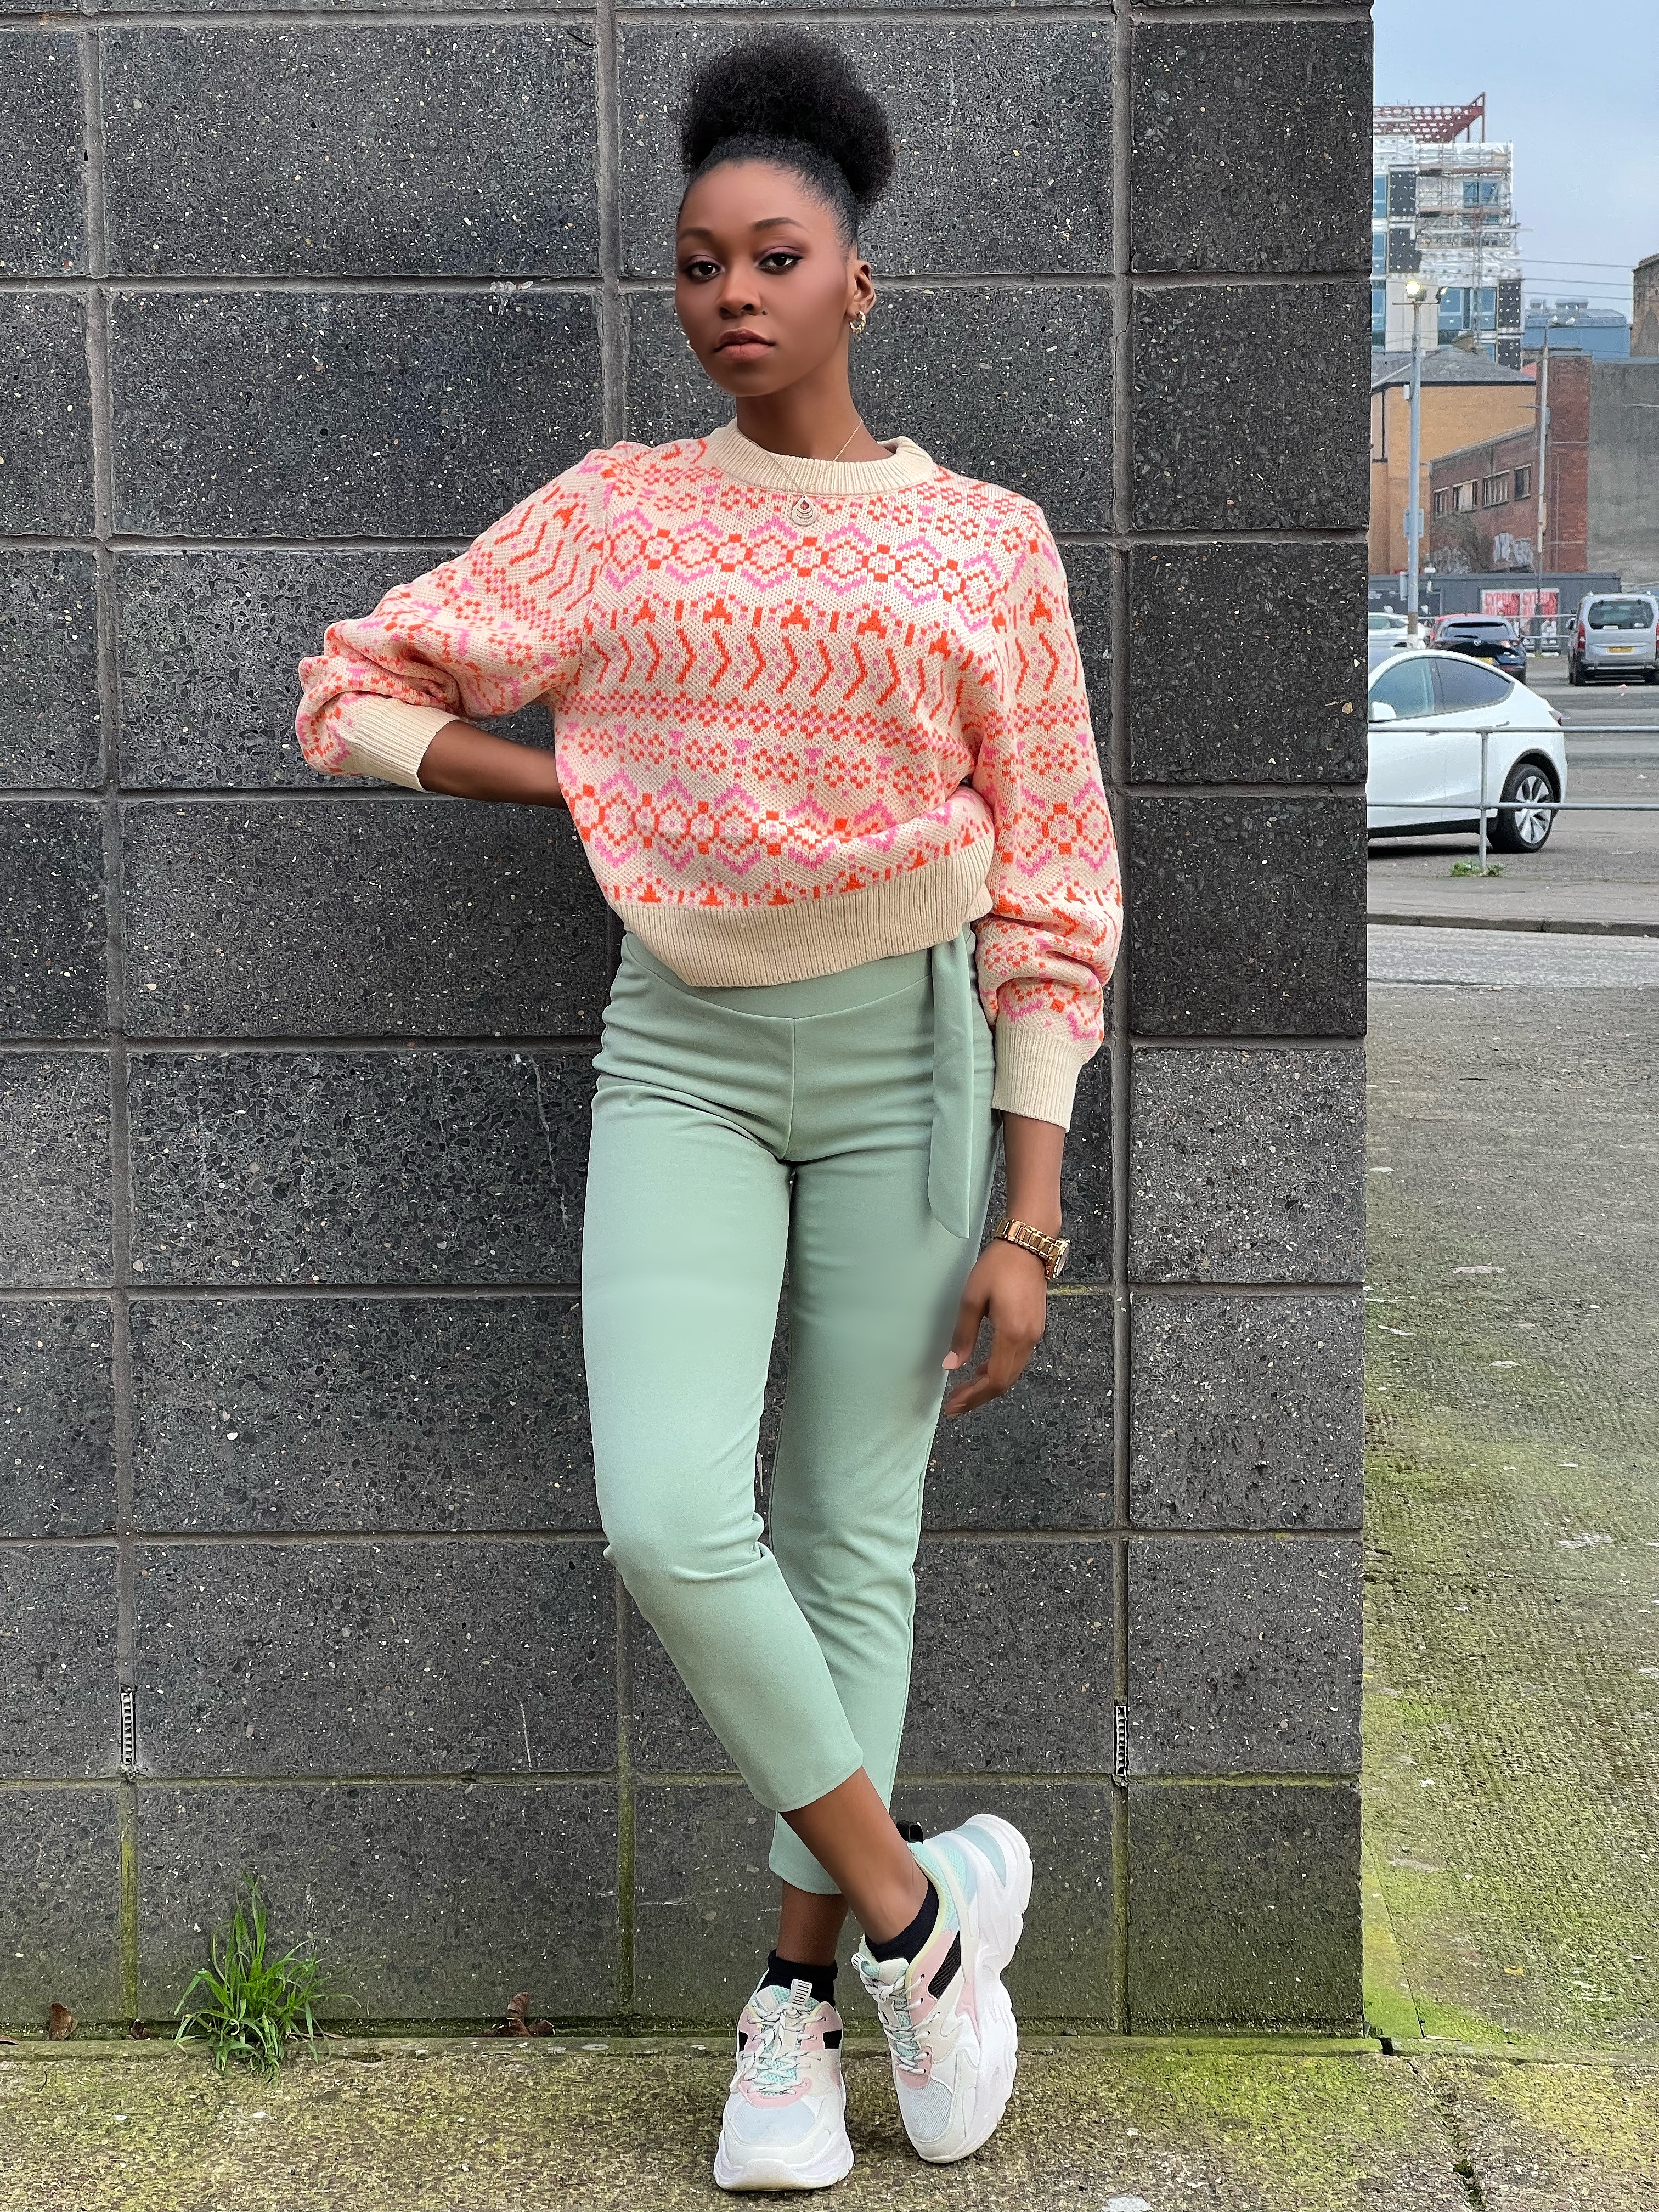 How to style high-waisted pants with a sweater